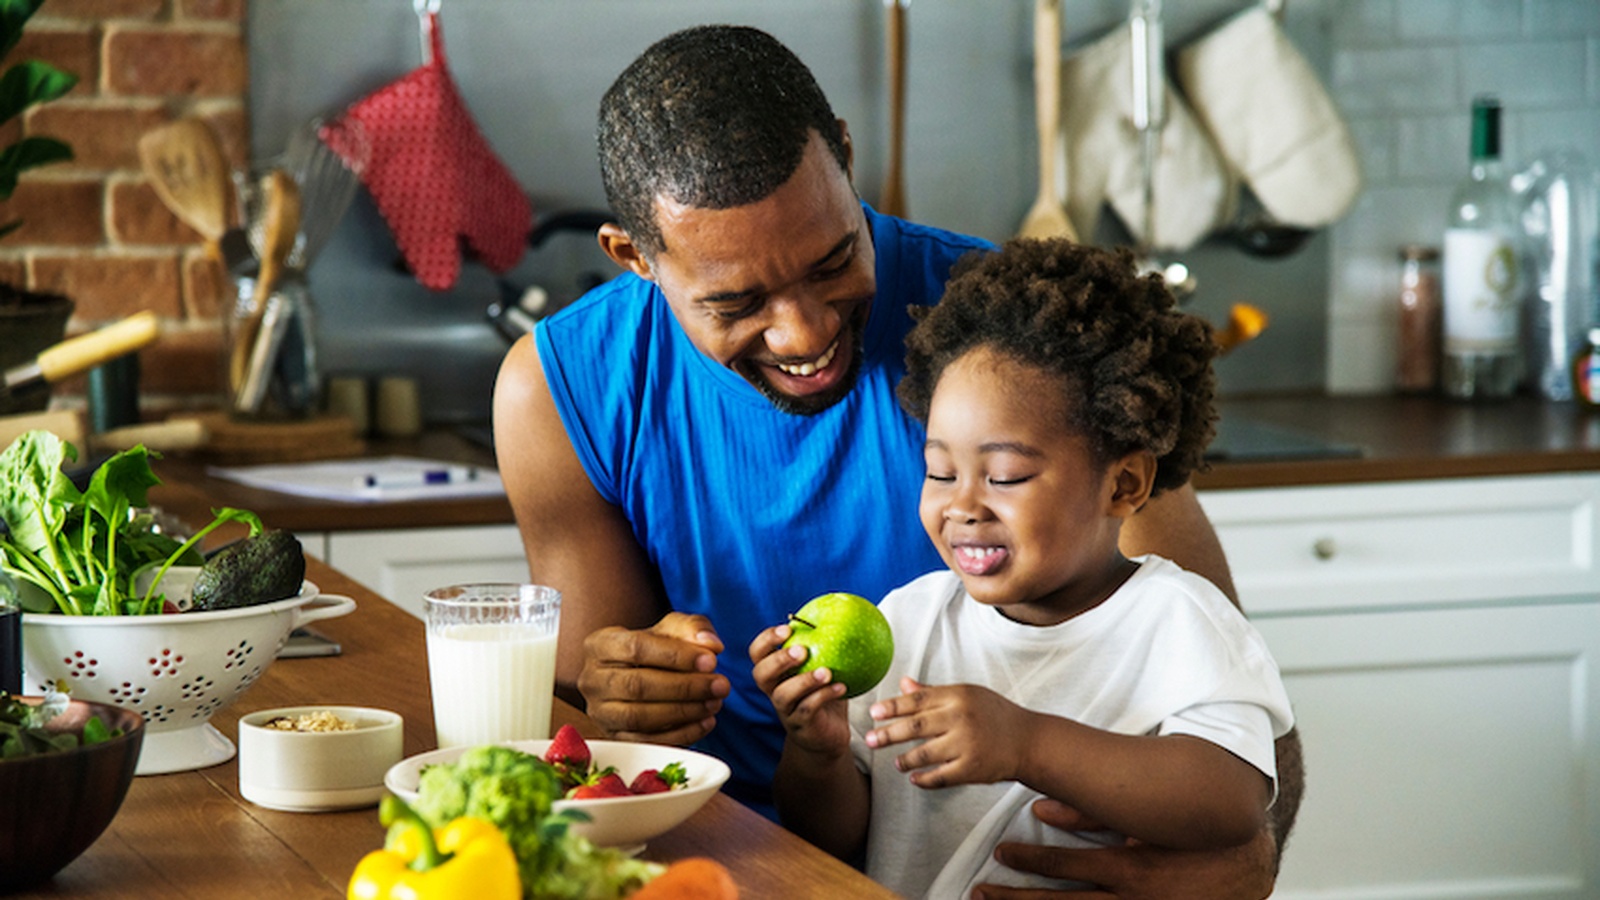 Did You Know You Can Treat Diabetes by Addressing What You Eat?